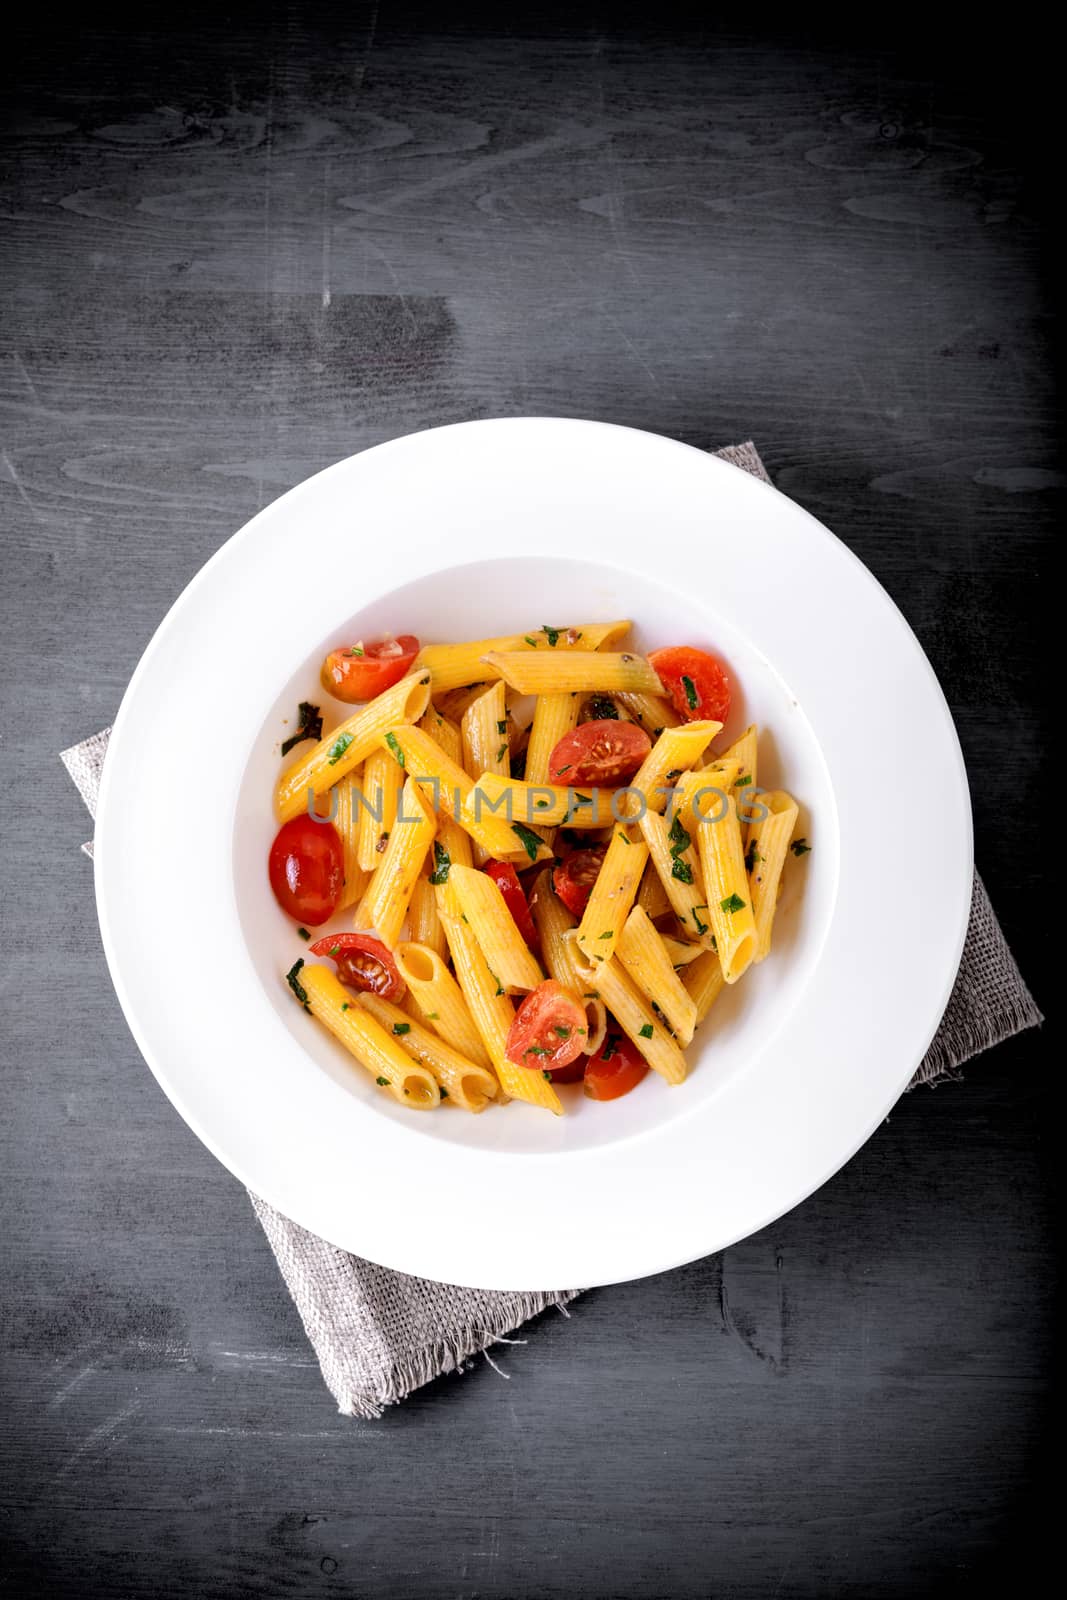 Penne with anchovy and tomato on a wooden surface